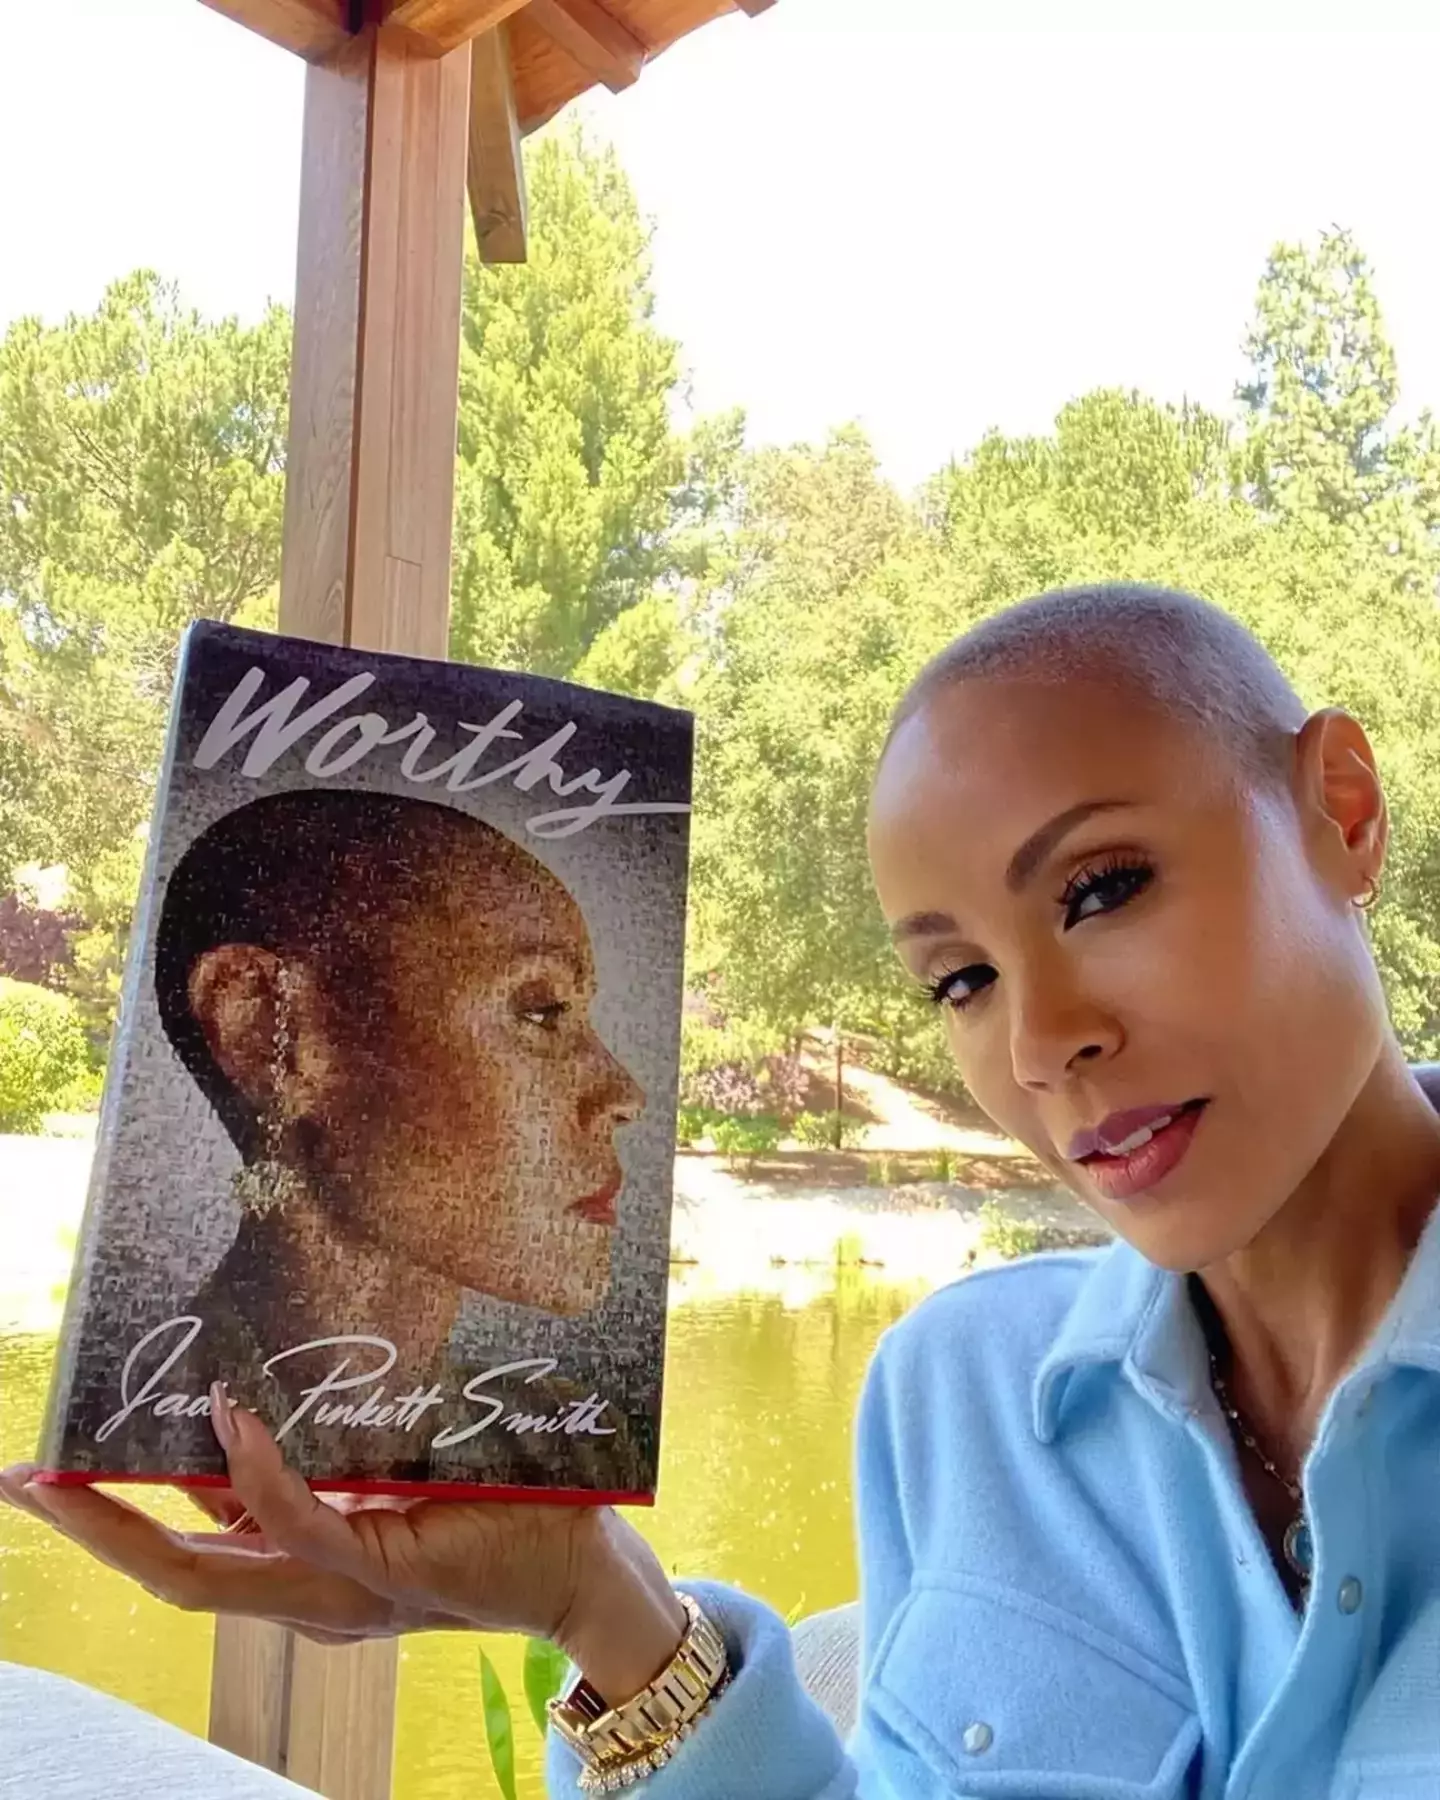 Jada Pinkett Smith's new autobiography is out now.